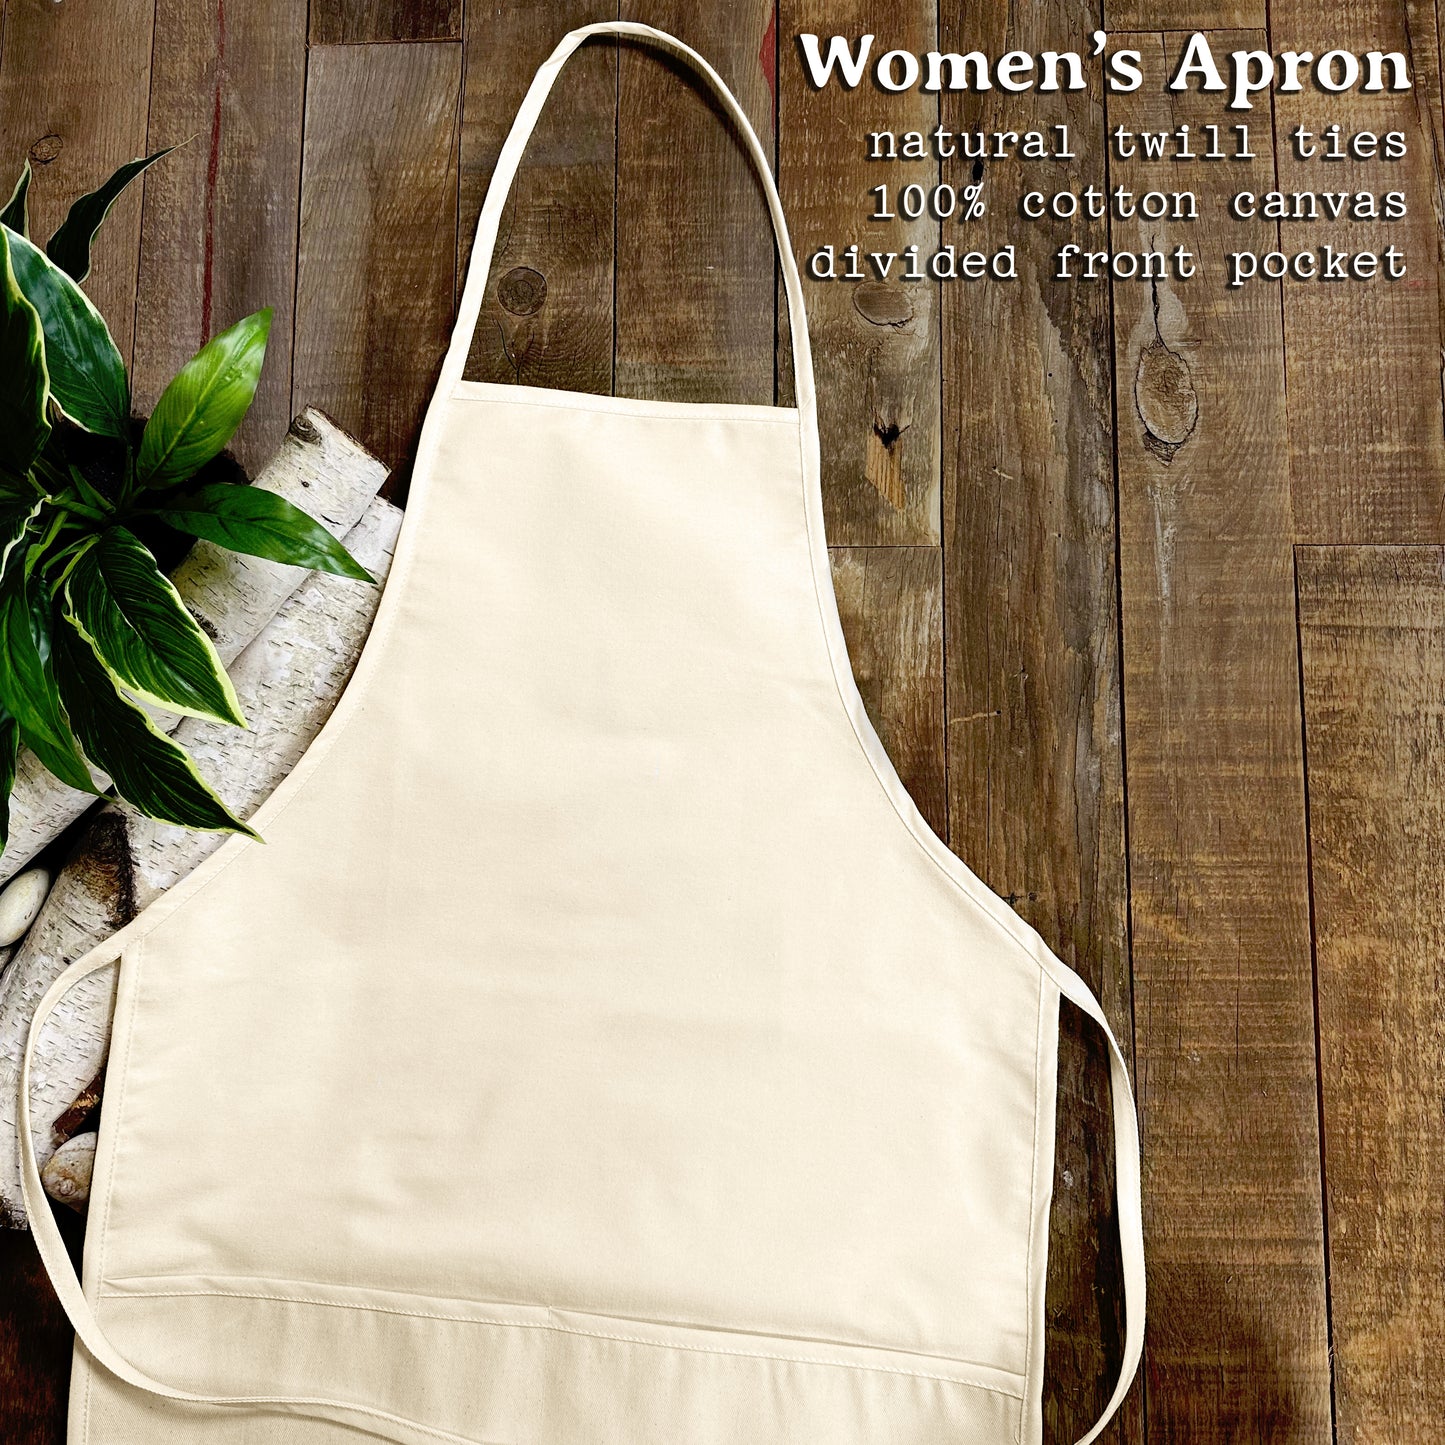 The Cabin is my Happy Place - Women's Apron